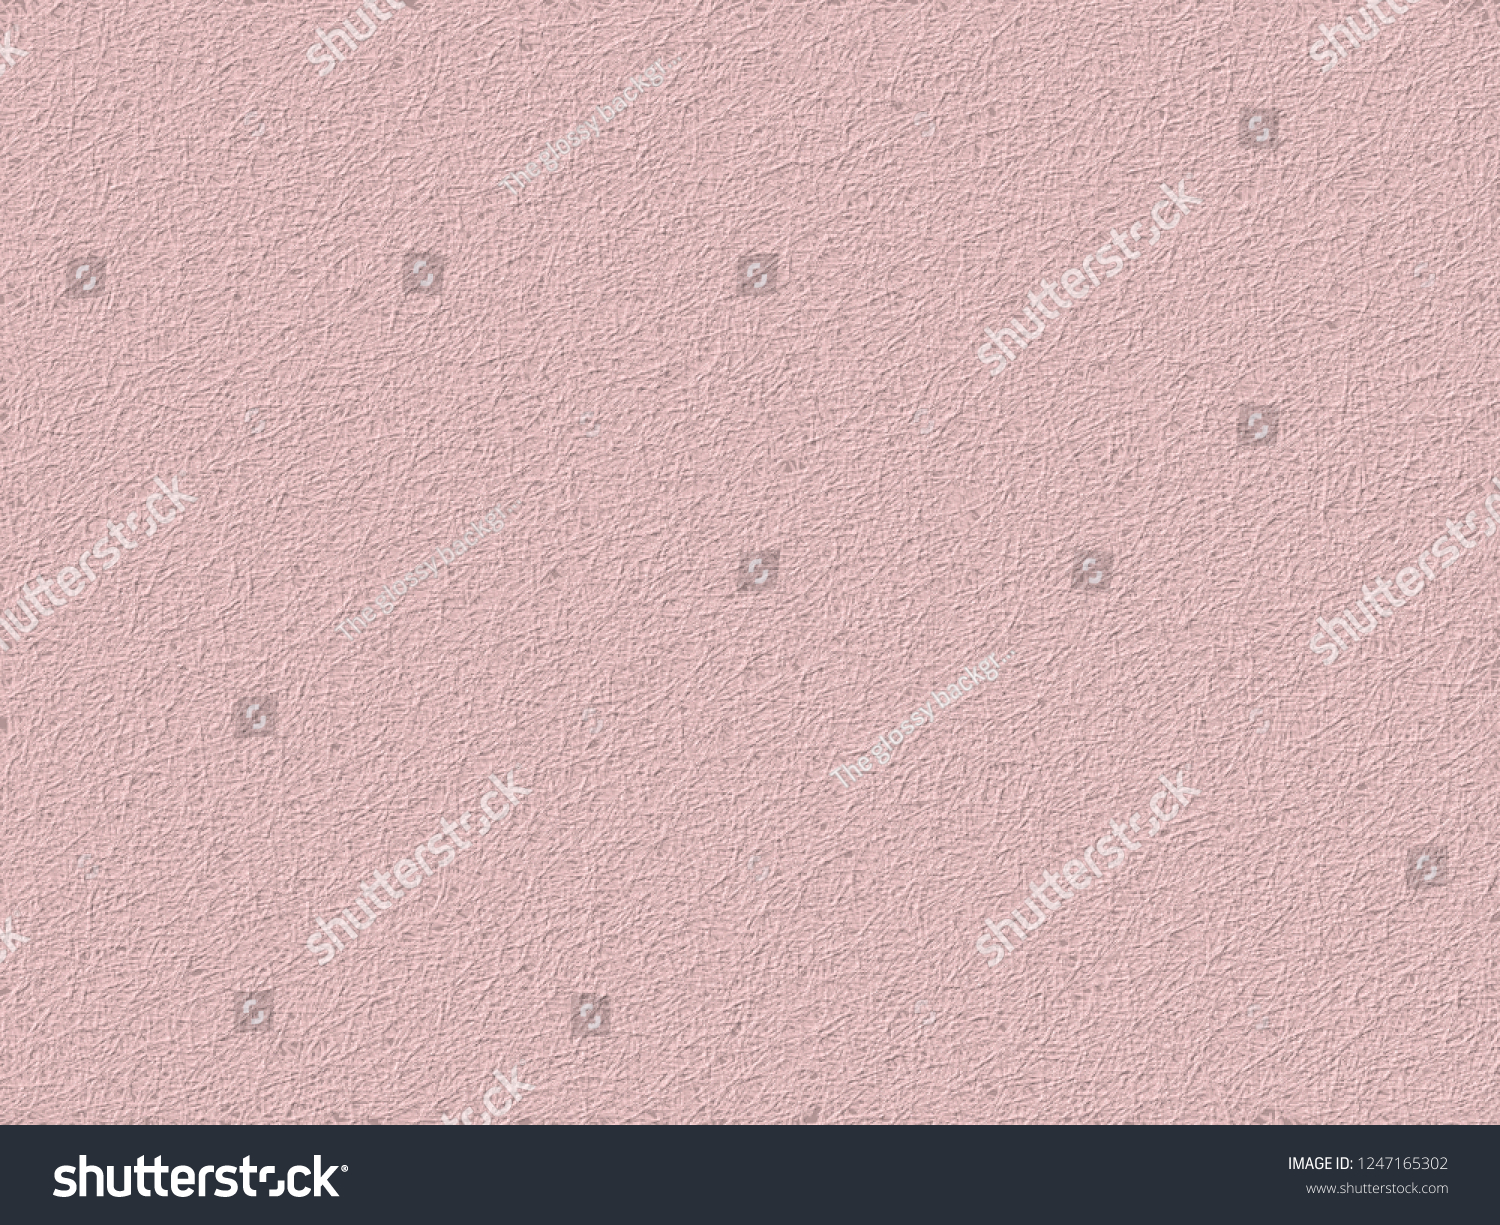 pink background texture wall. white gray paper. wall Beautiful concrete stucco. painted cement Surface design banners.Gradient,consisting,paper design,book,abstract shape  and have copy space for text #1247165302